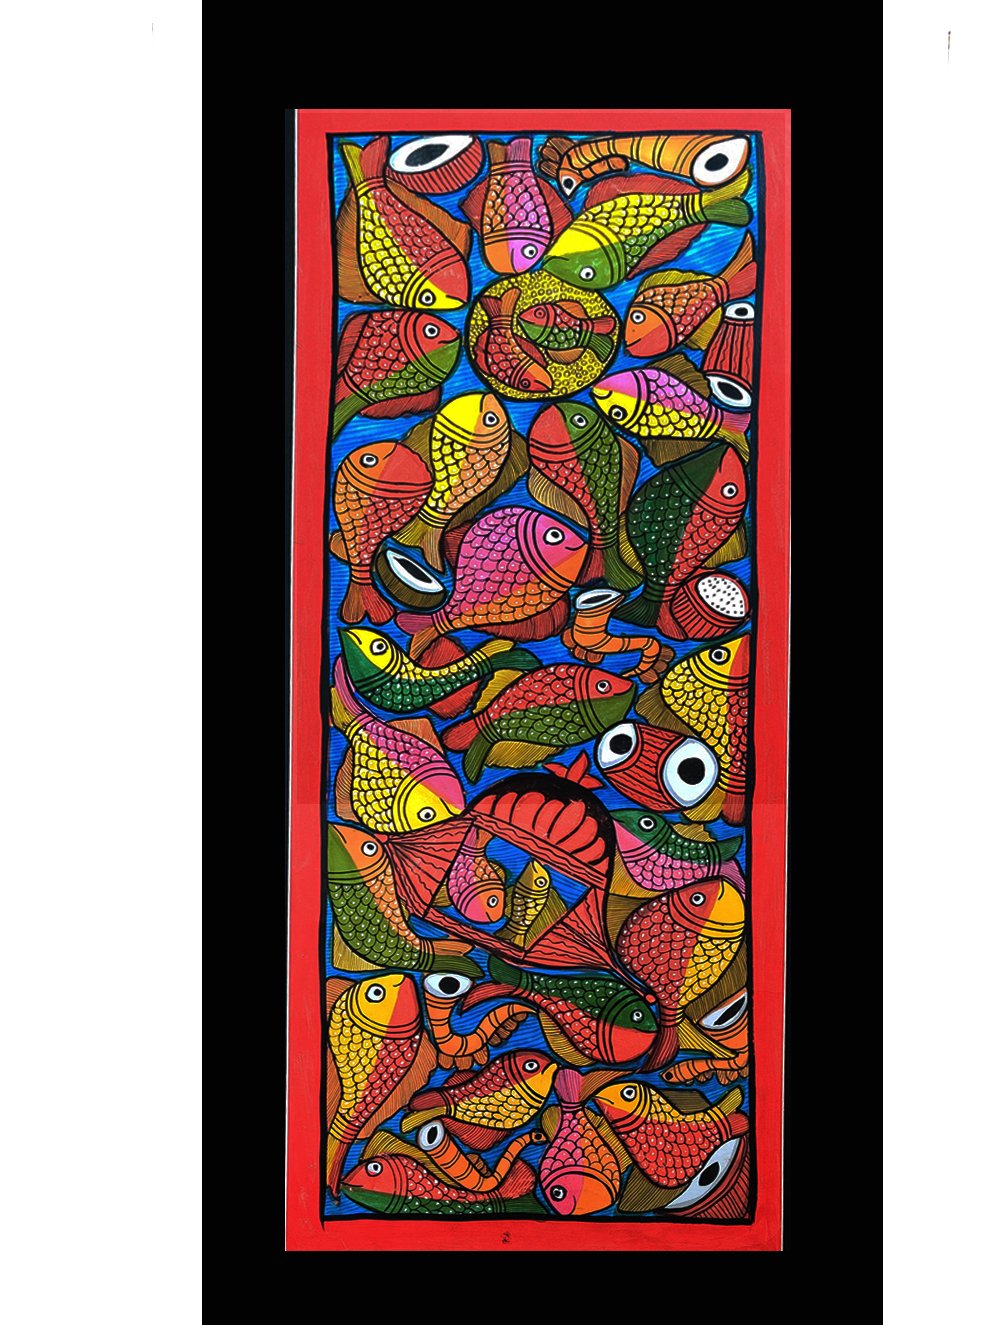 Load image into Gallery viewer, Large Potua Art Painting with Mount - Wedding of the Fish (31&quot; X 14&quot;)